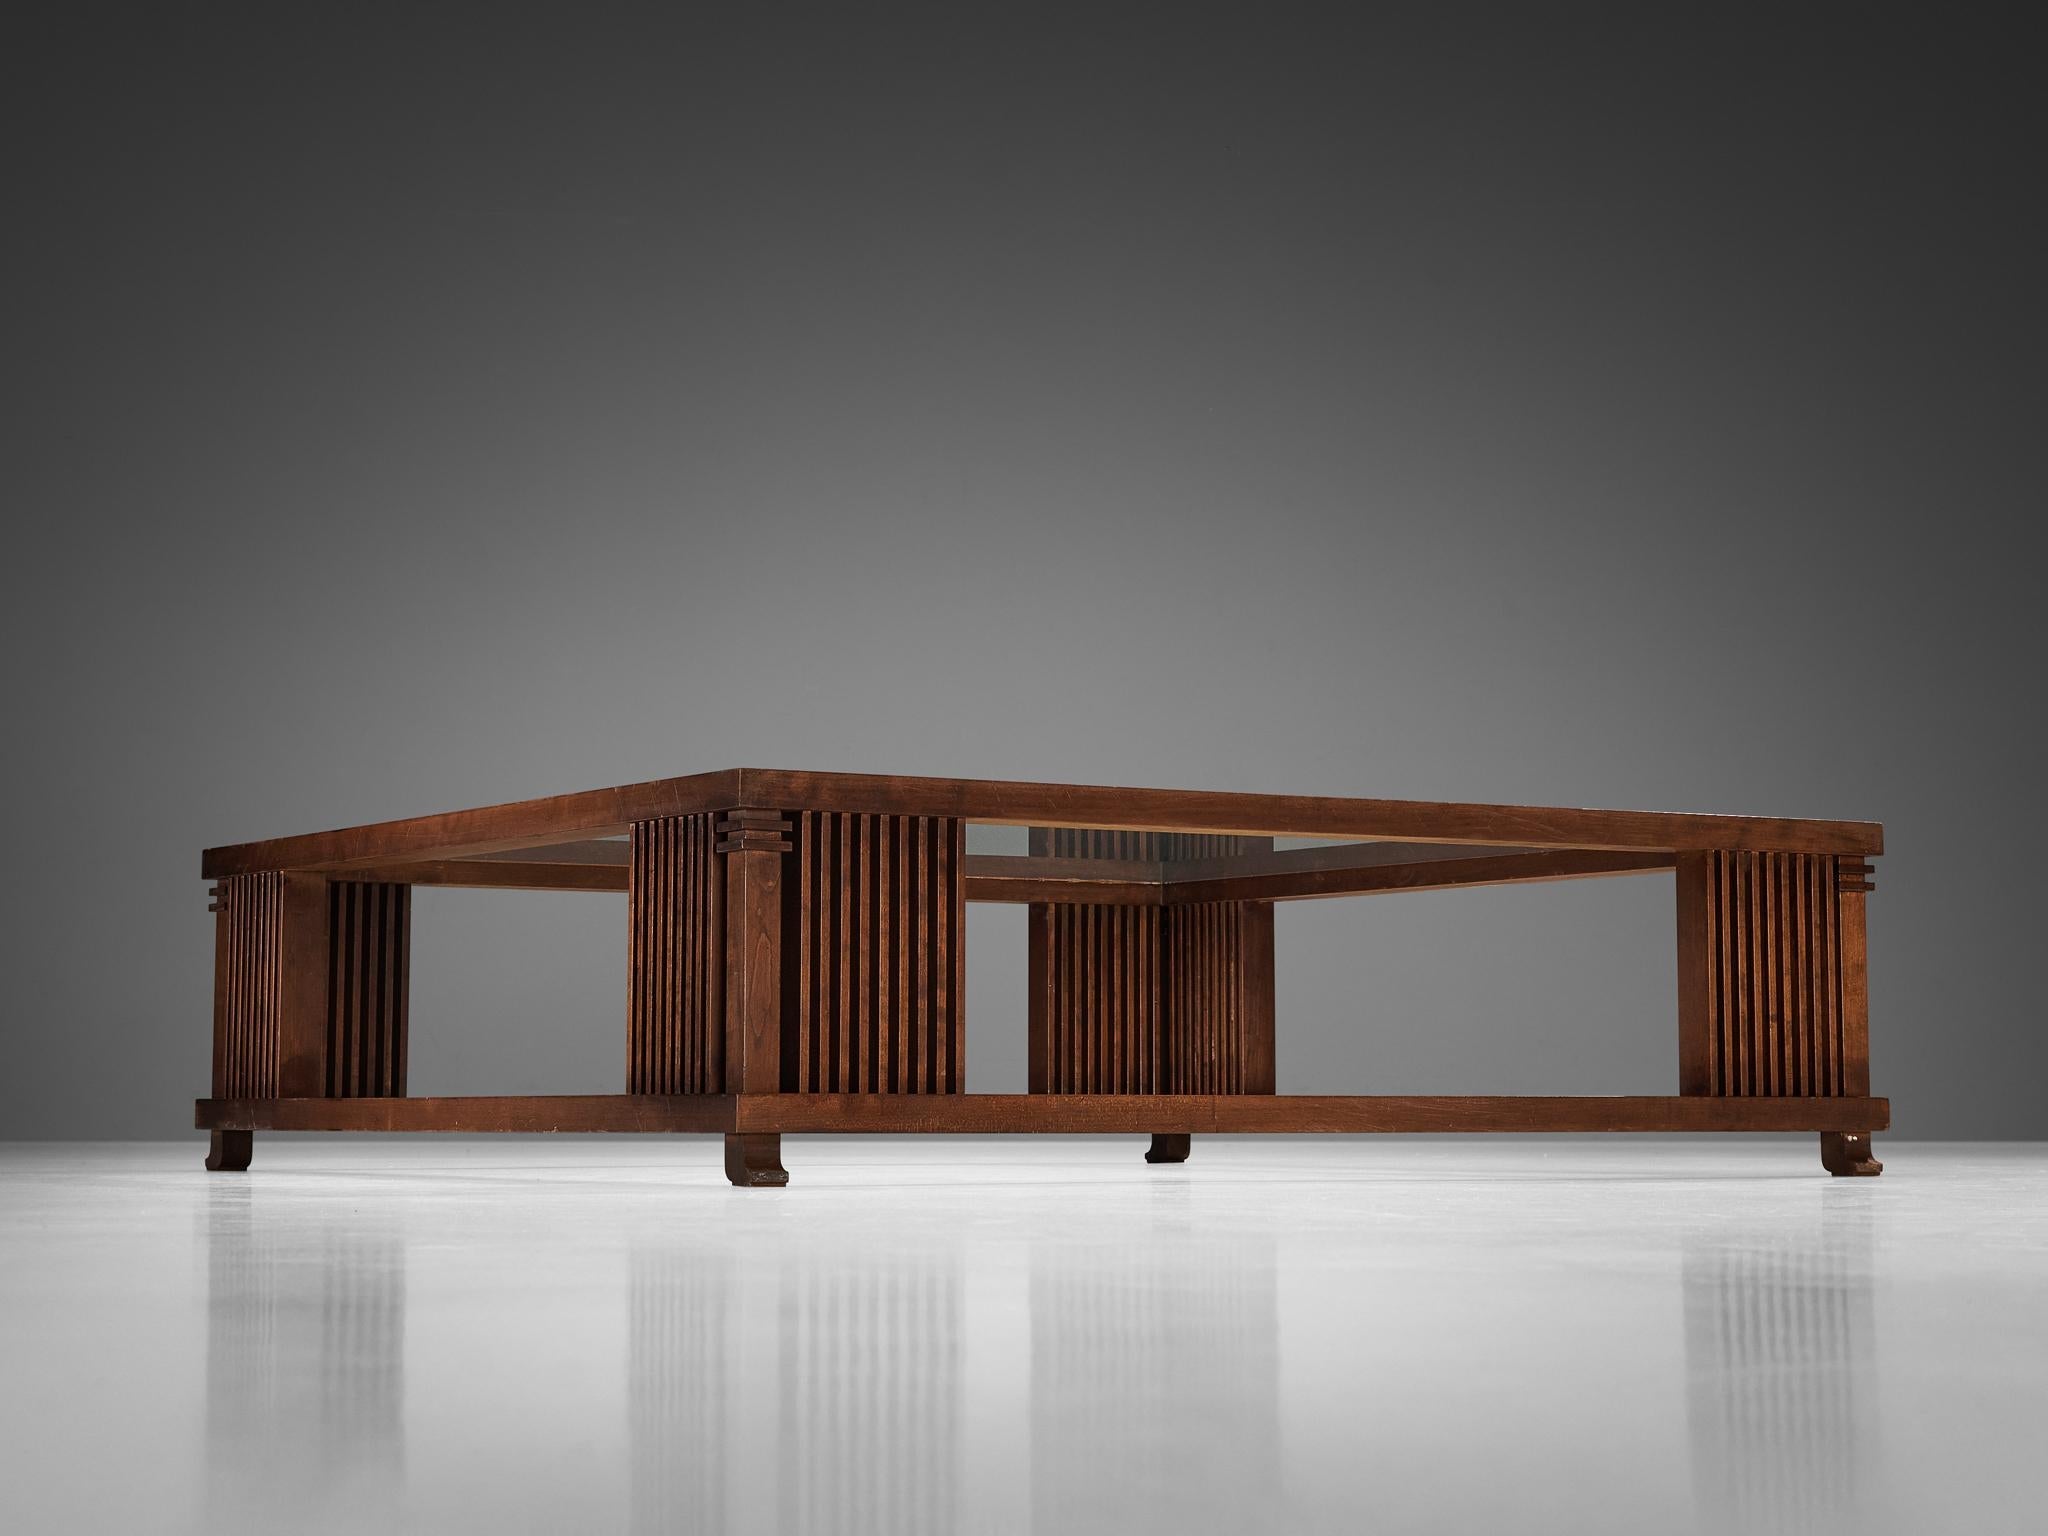 Frank Lloyd Wright for Cassina 'Robie' Coffee Table in Maple and Glass